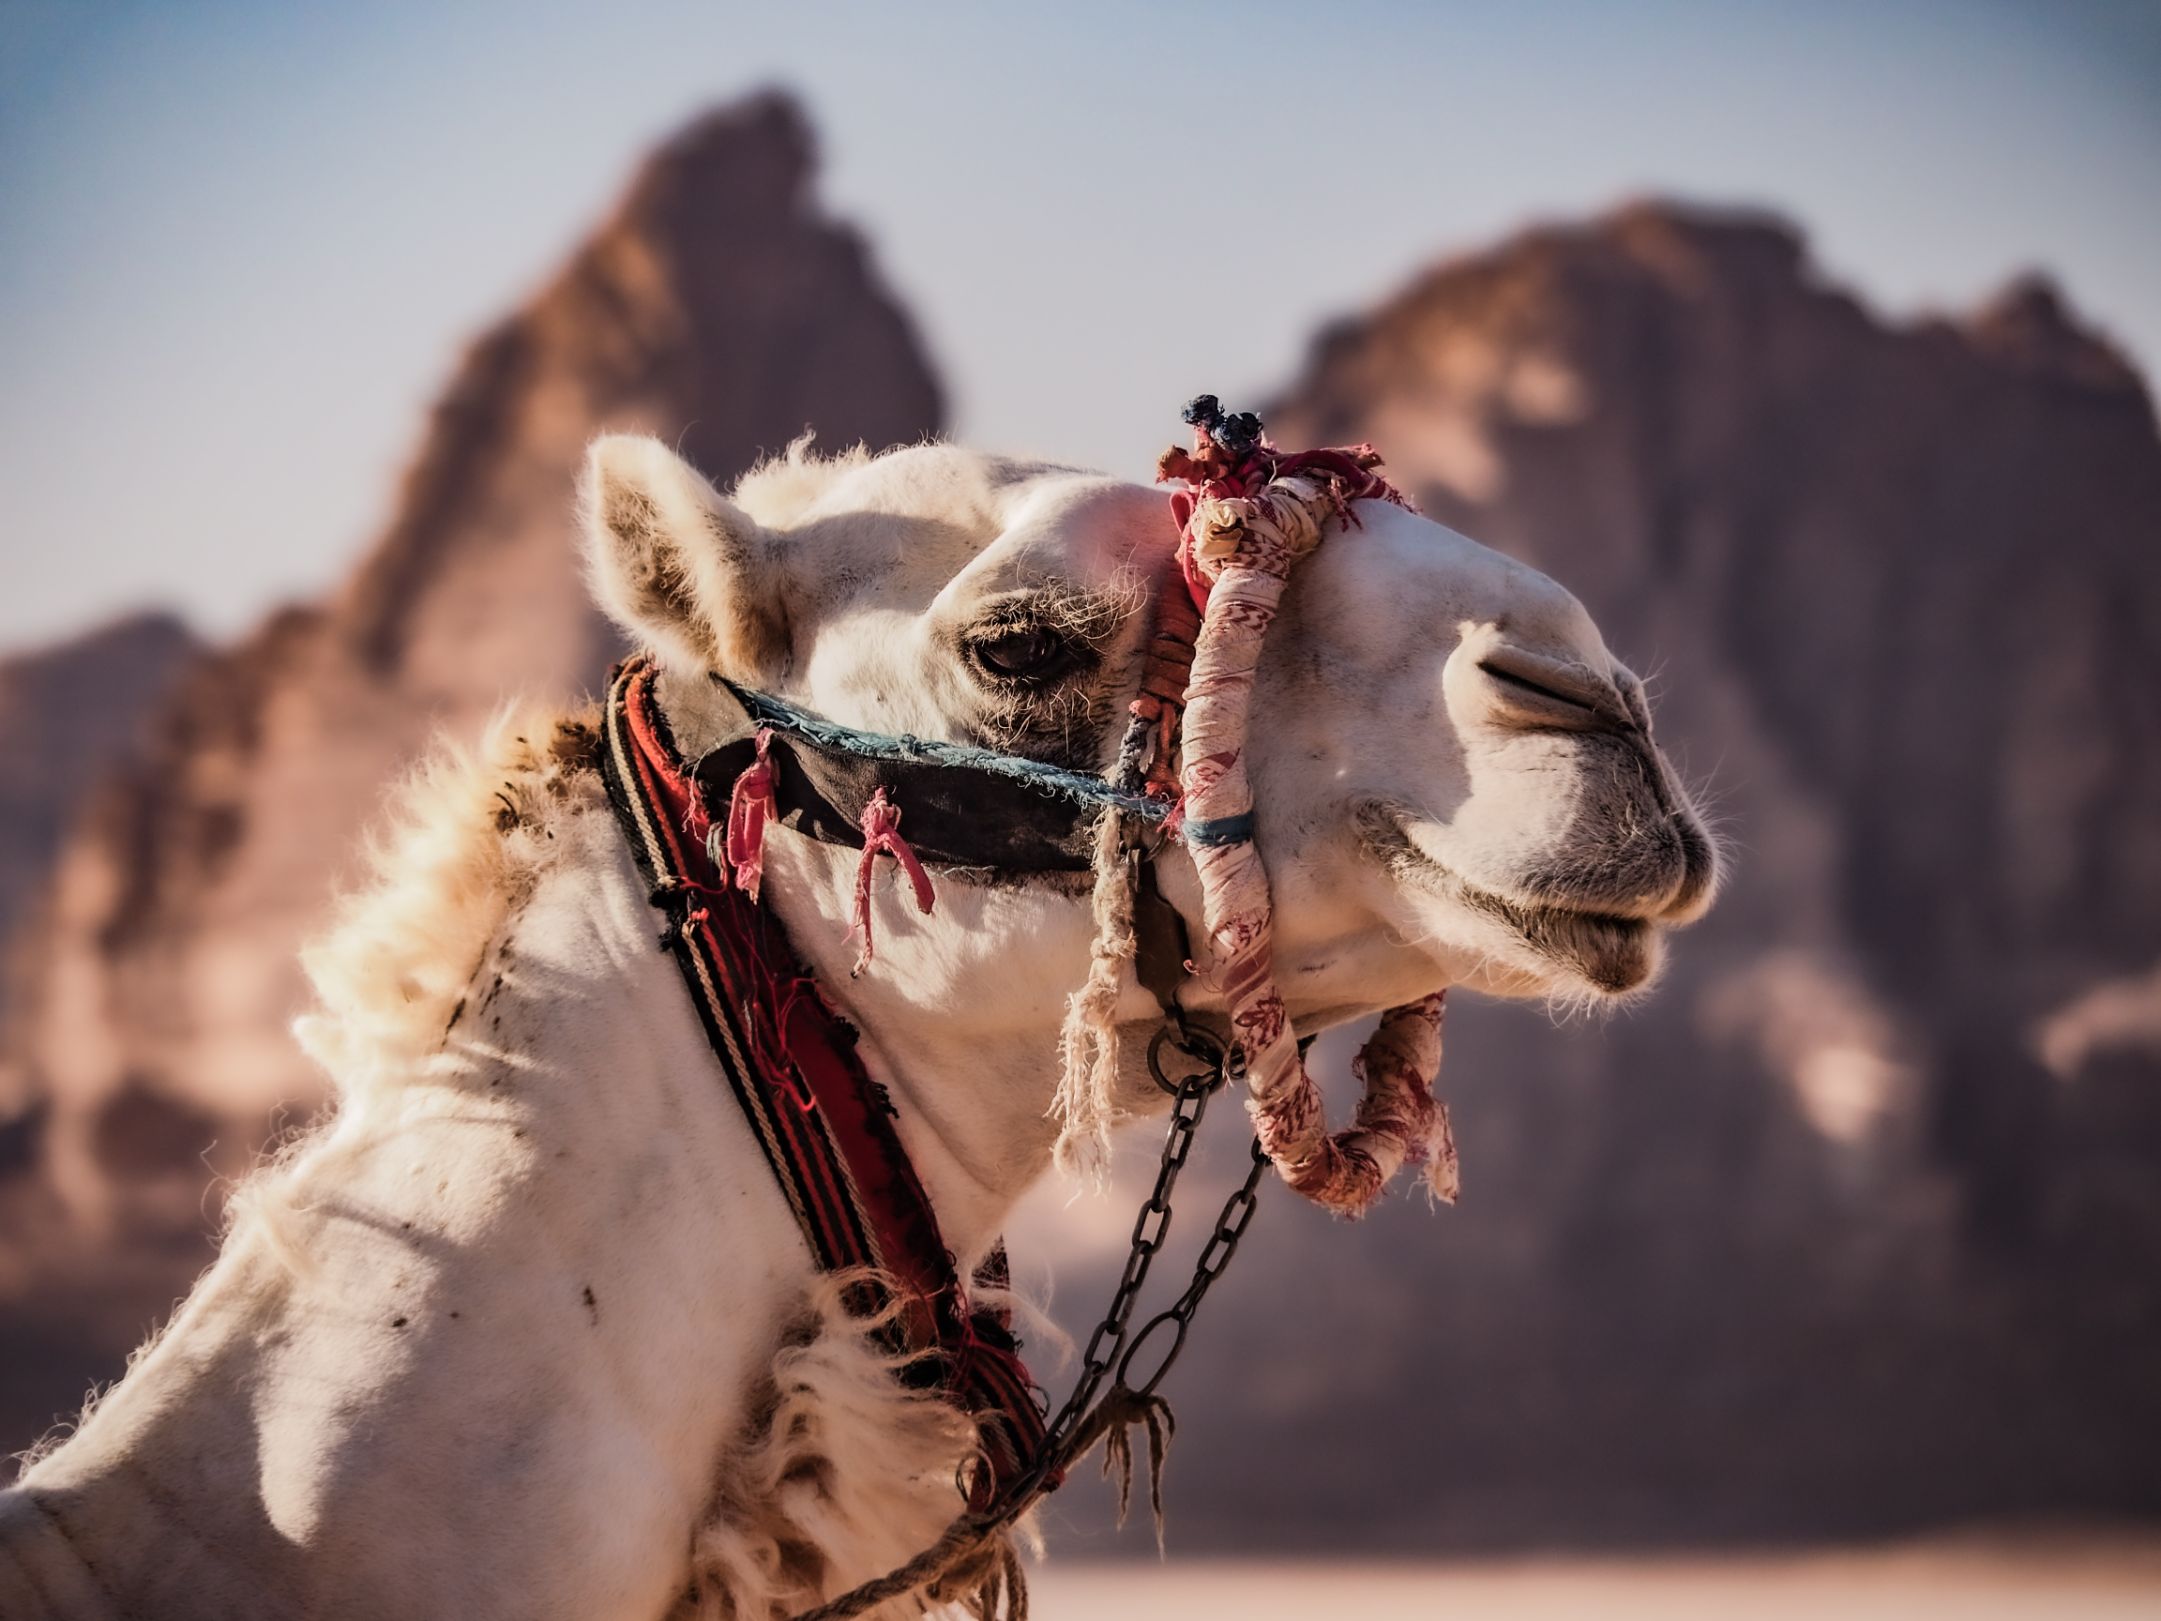 Petra and Wadi Rum Two Day Tour from Jerusalem